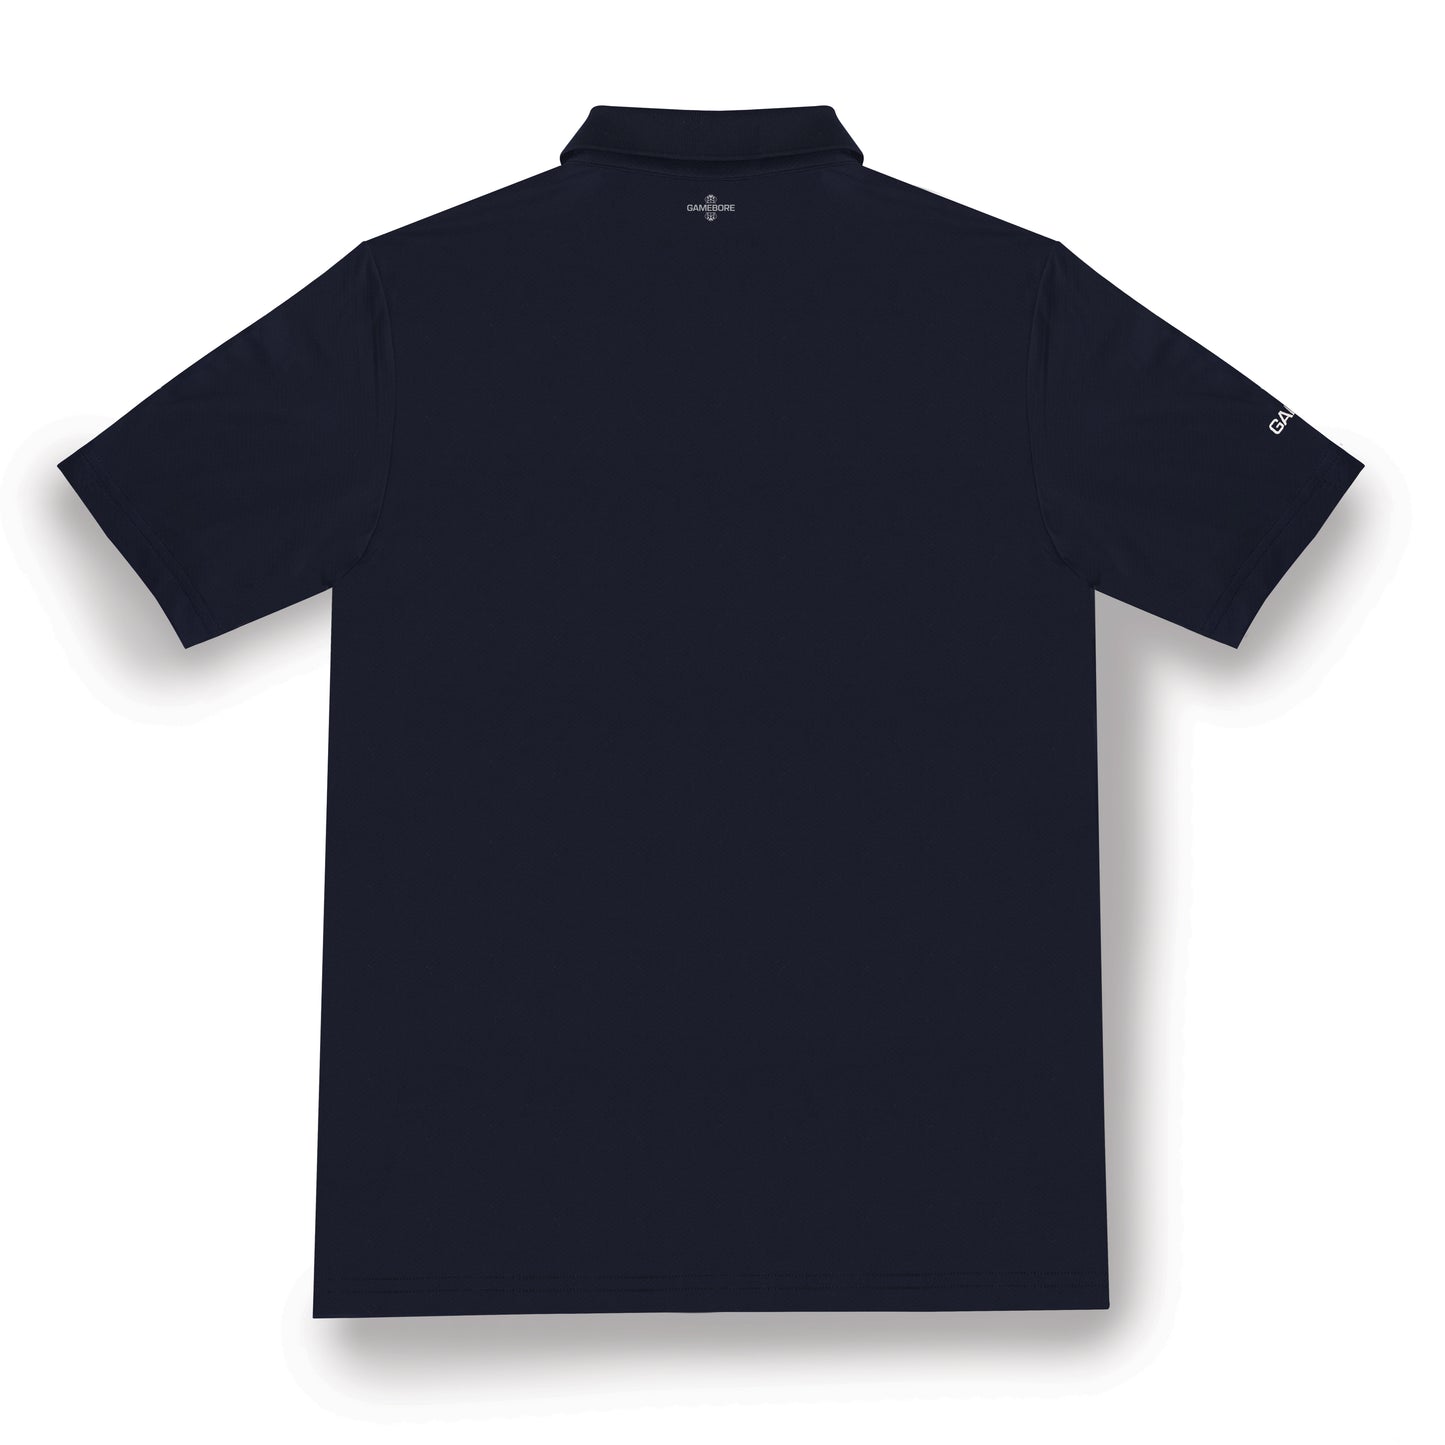 Gamebore Performance Polo